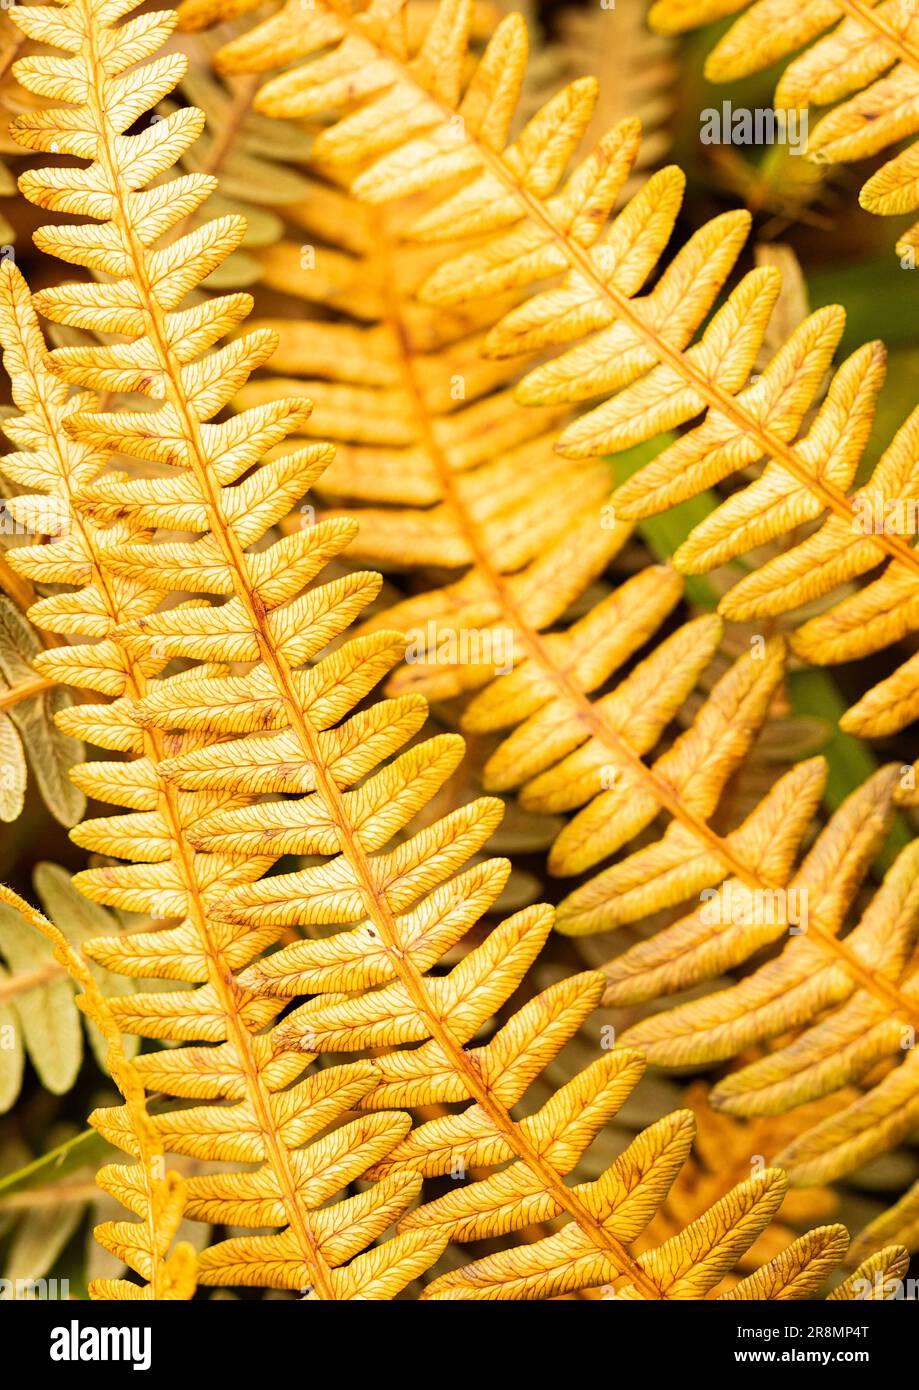 Patterns in Nature - Fern Stock Photo